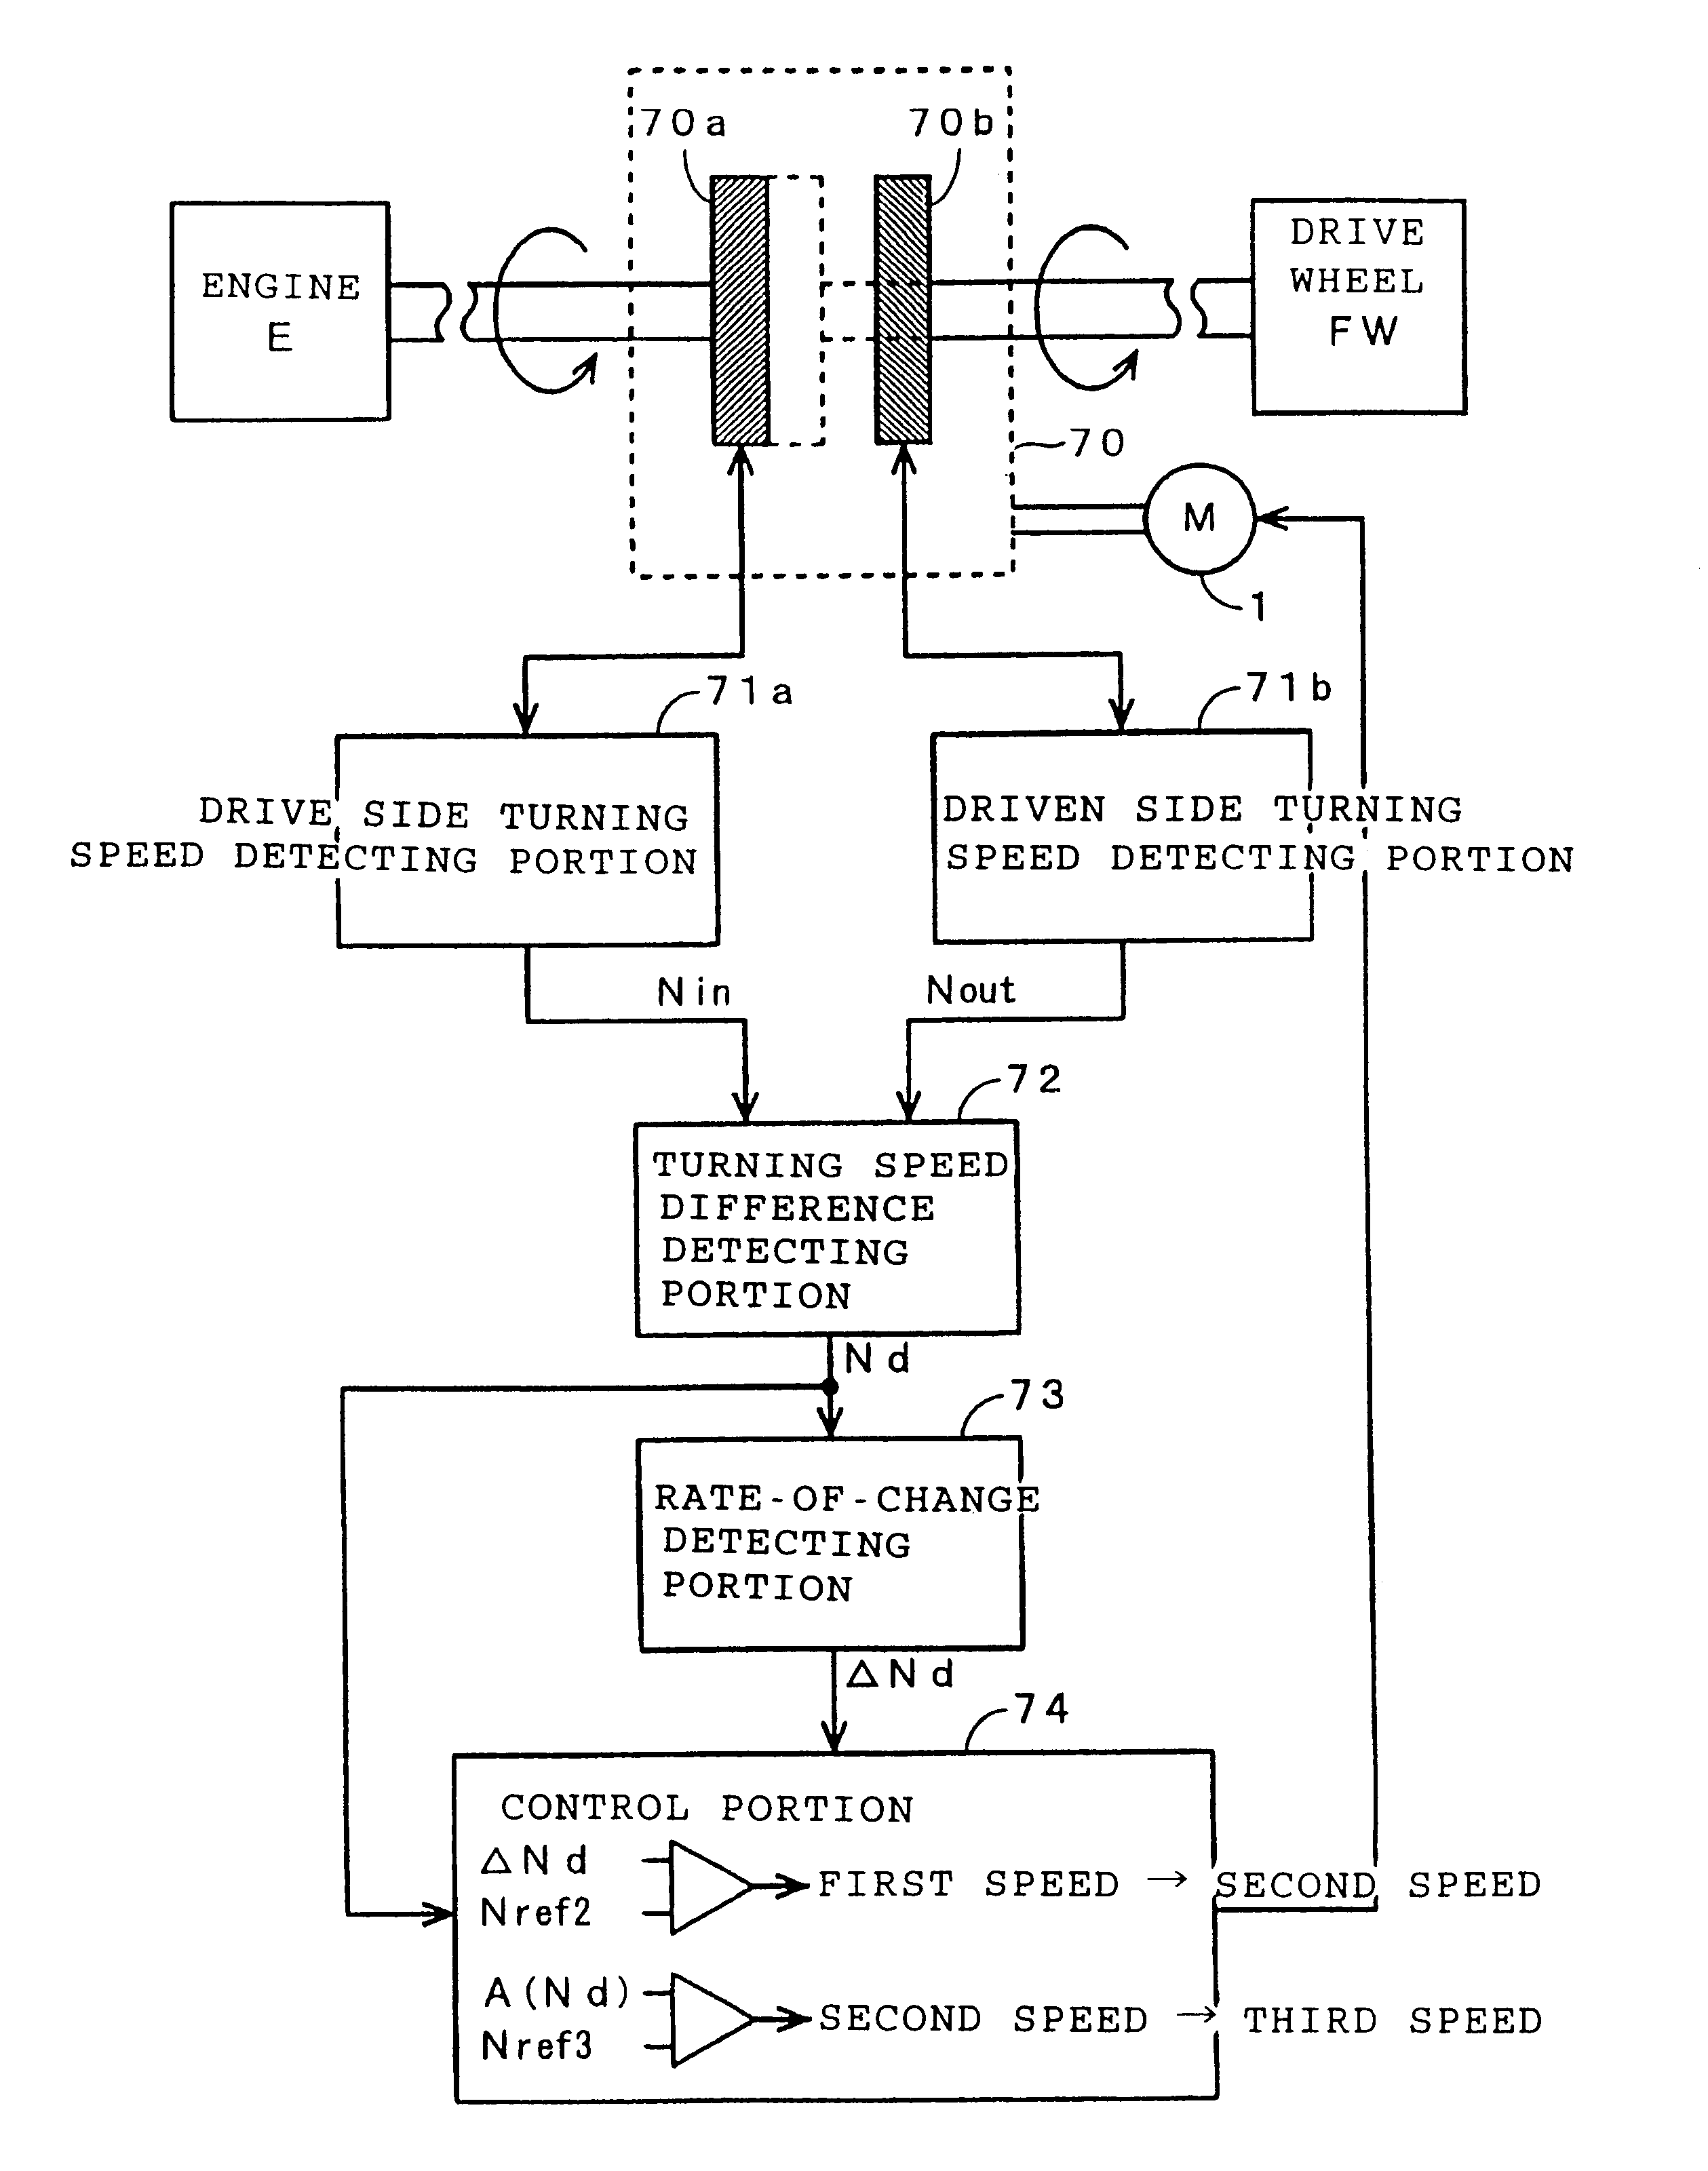 Clutch connection control system